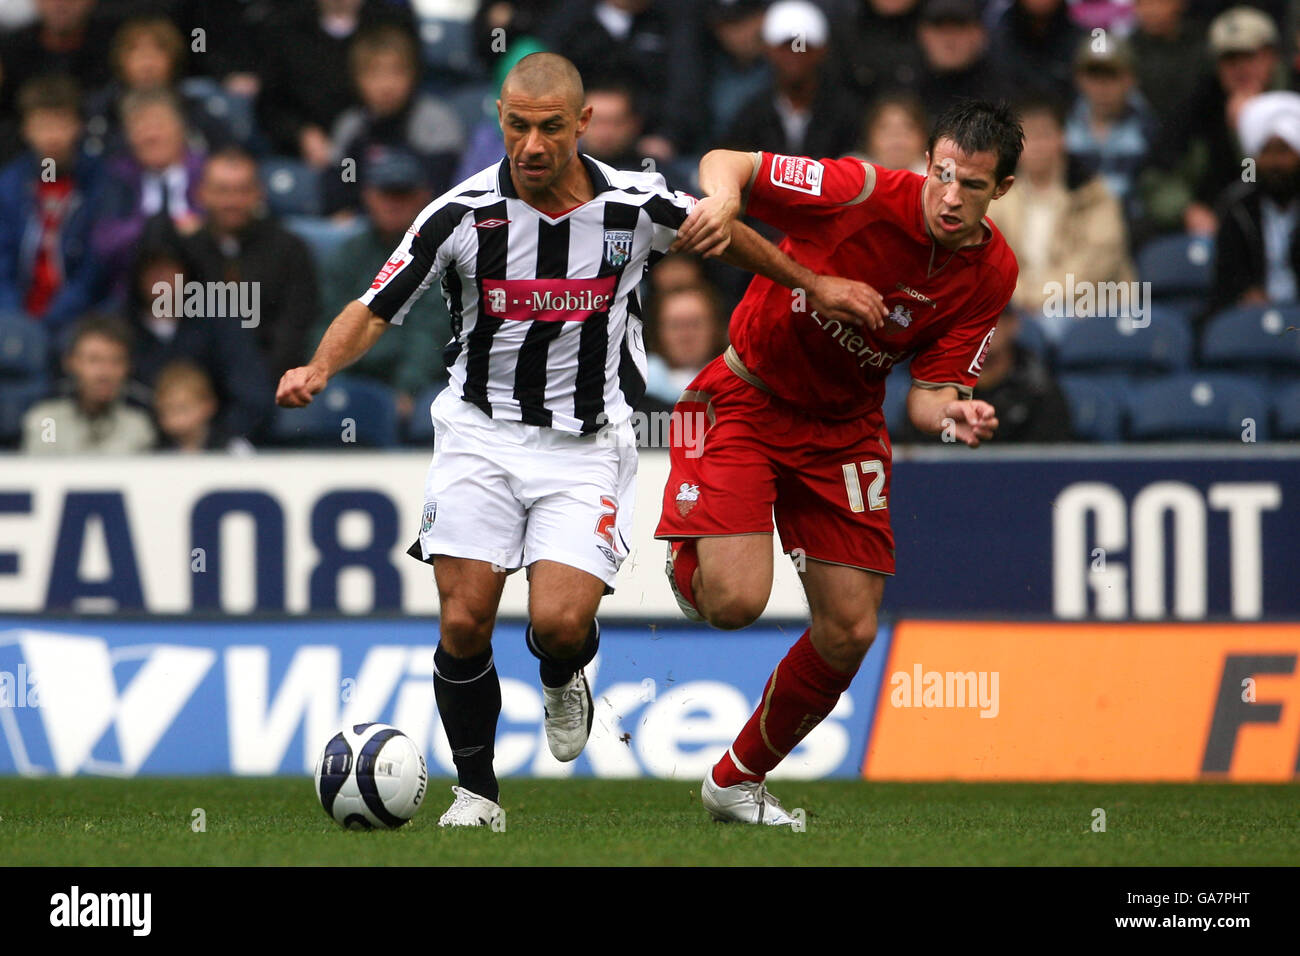 West Bromwich Albion's Kevin Phillips and Preston North End's Sean St. Ledger during the Coca-Cola Football League Championship match at The Hawthorns, West Bromwich. Stock Photo